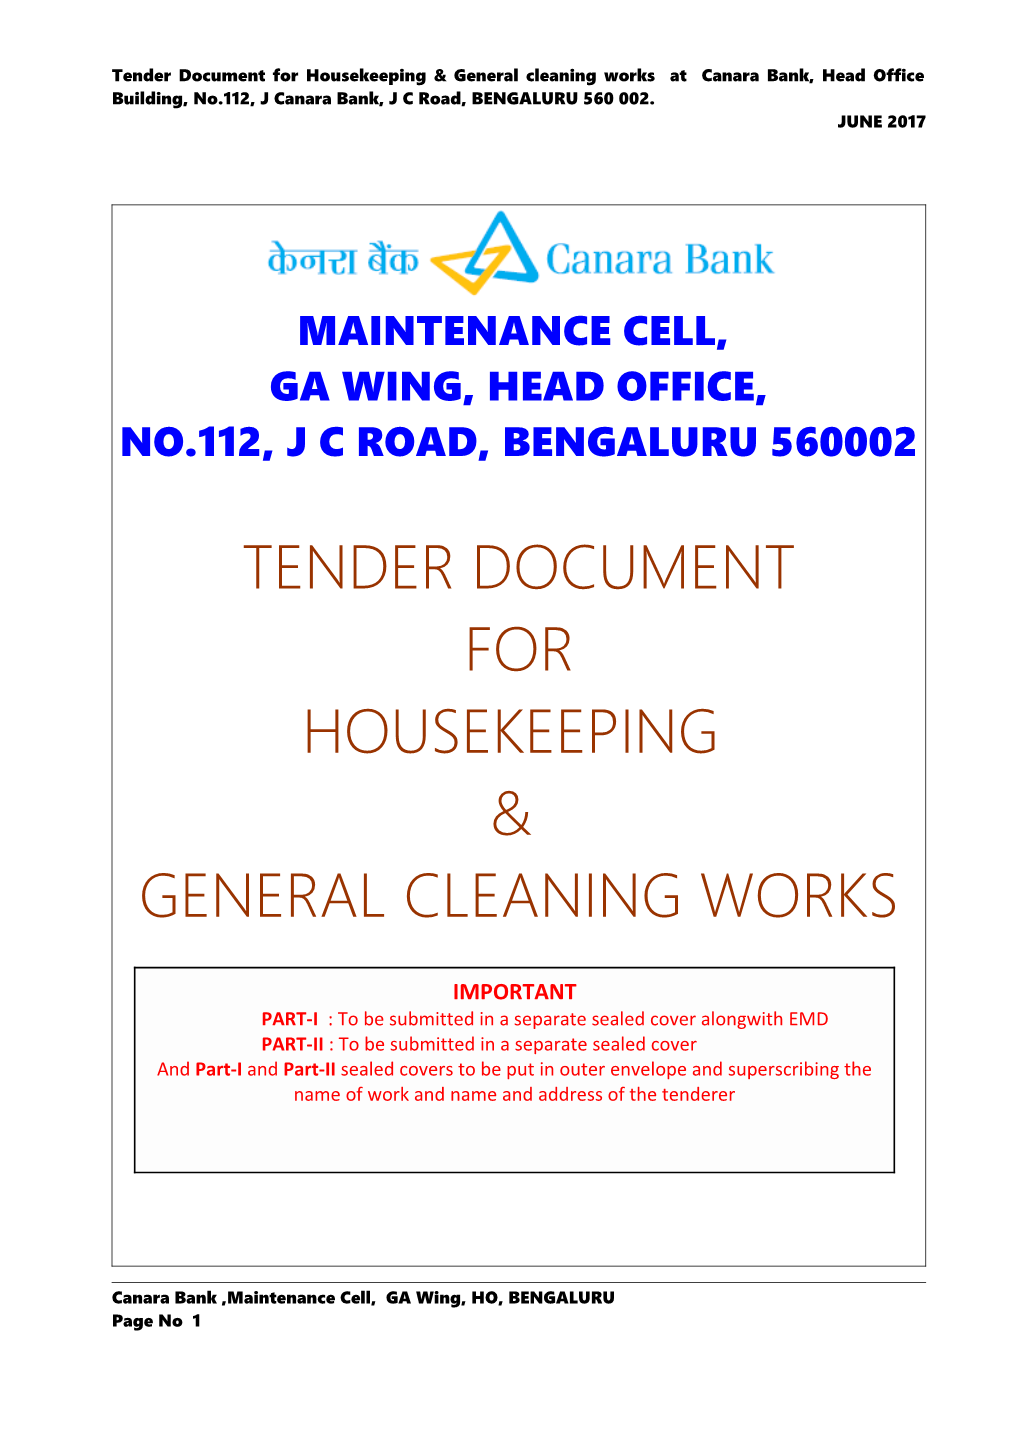 Tender Document for Housekeeping & General Cleaning Works at Canara Bank, Head Office